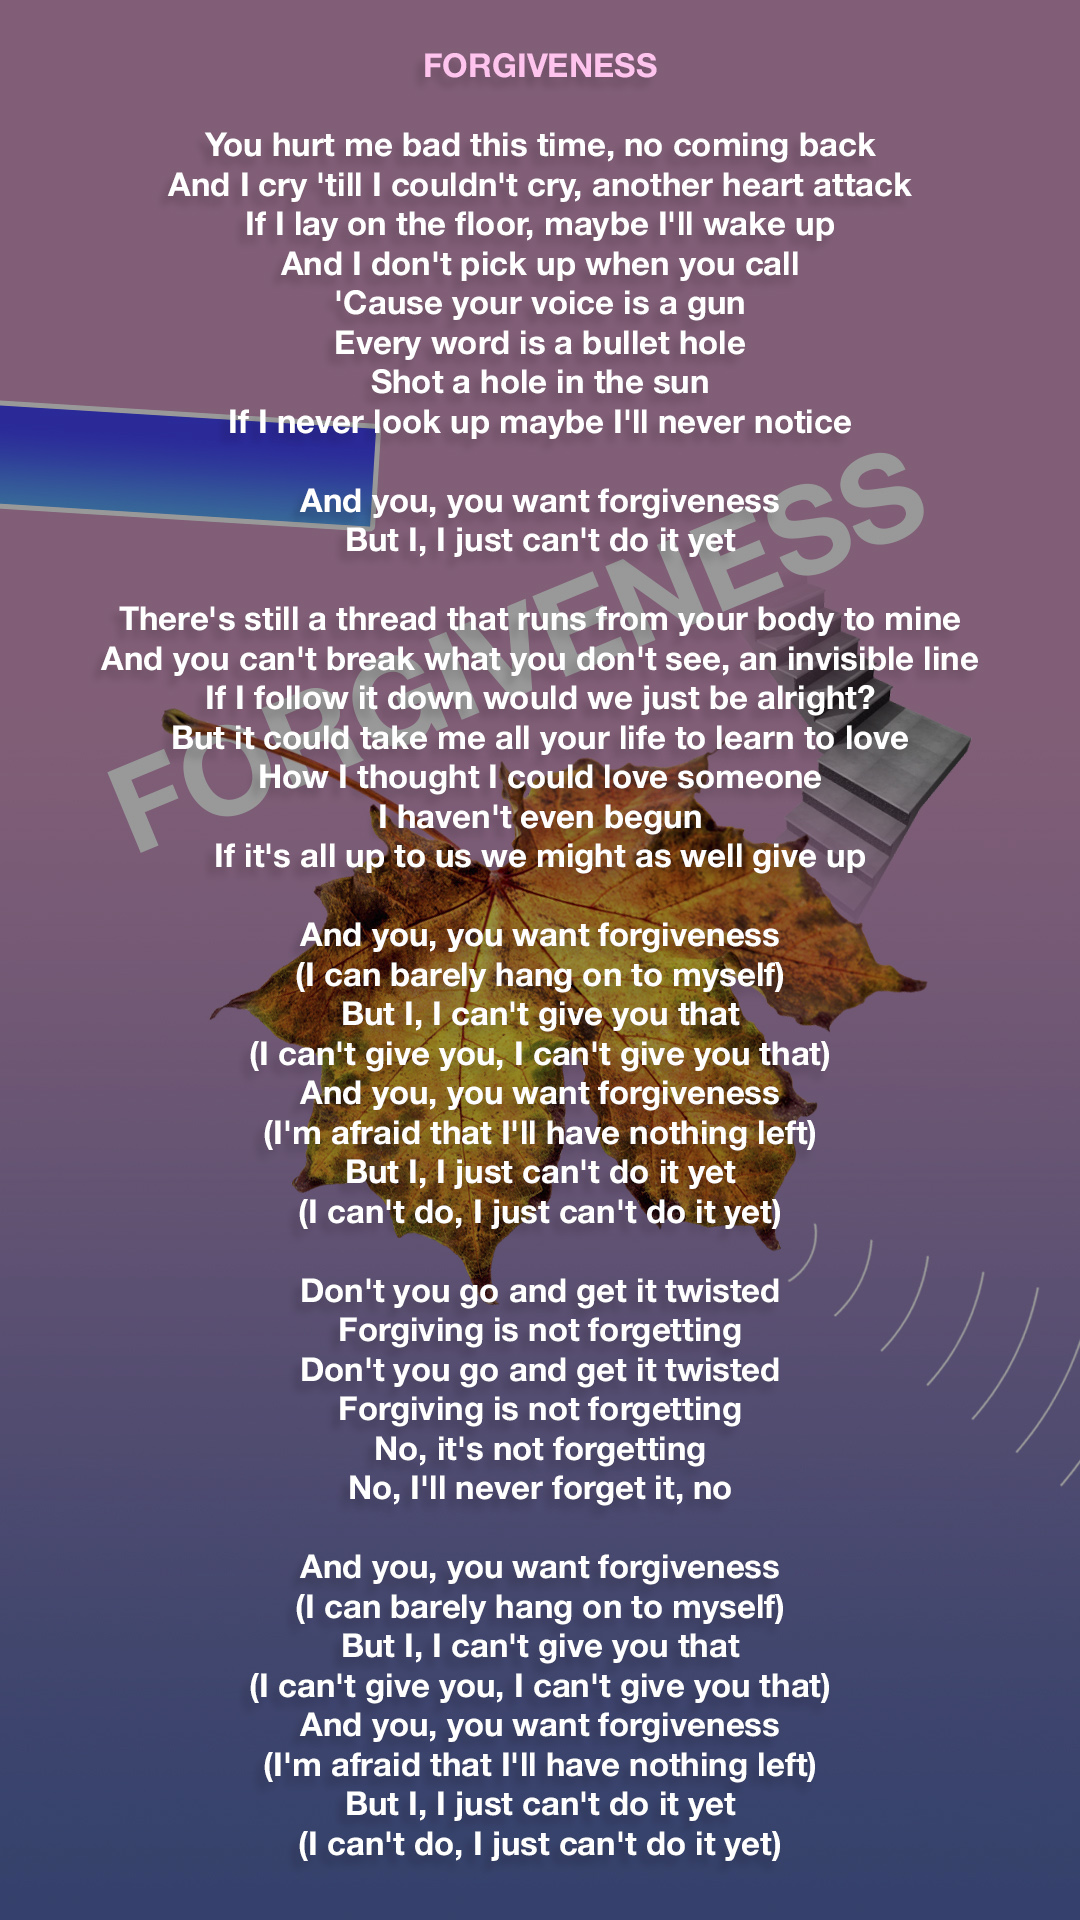 FORGIVENESS - Paramore - After Laughter LYRICS by alanrius on